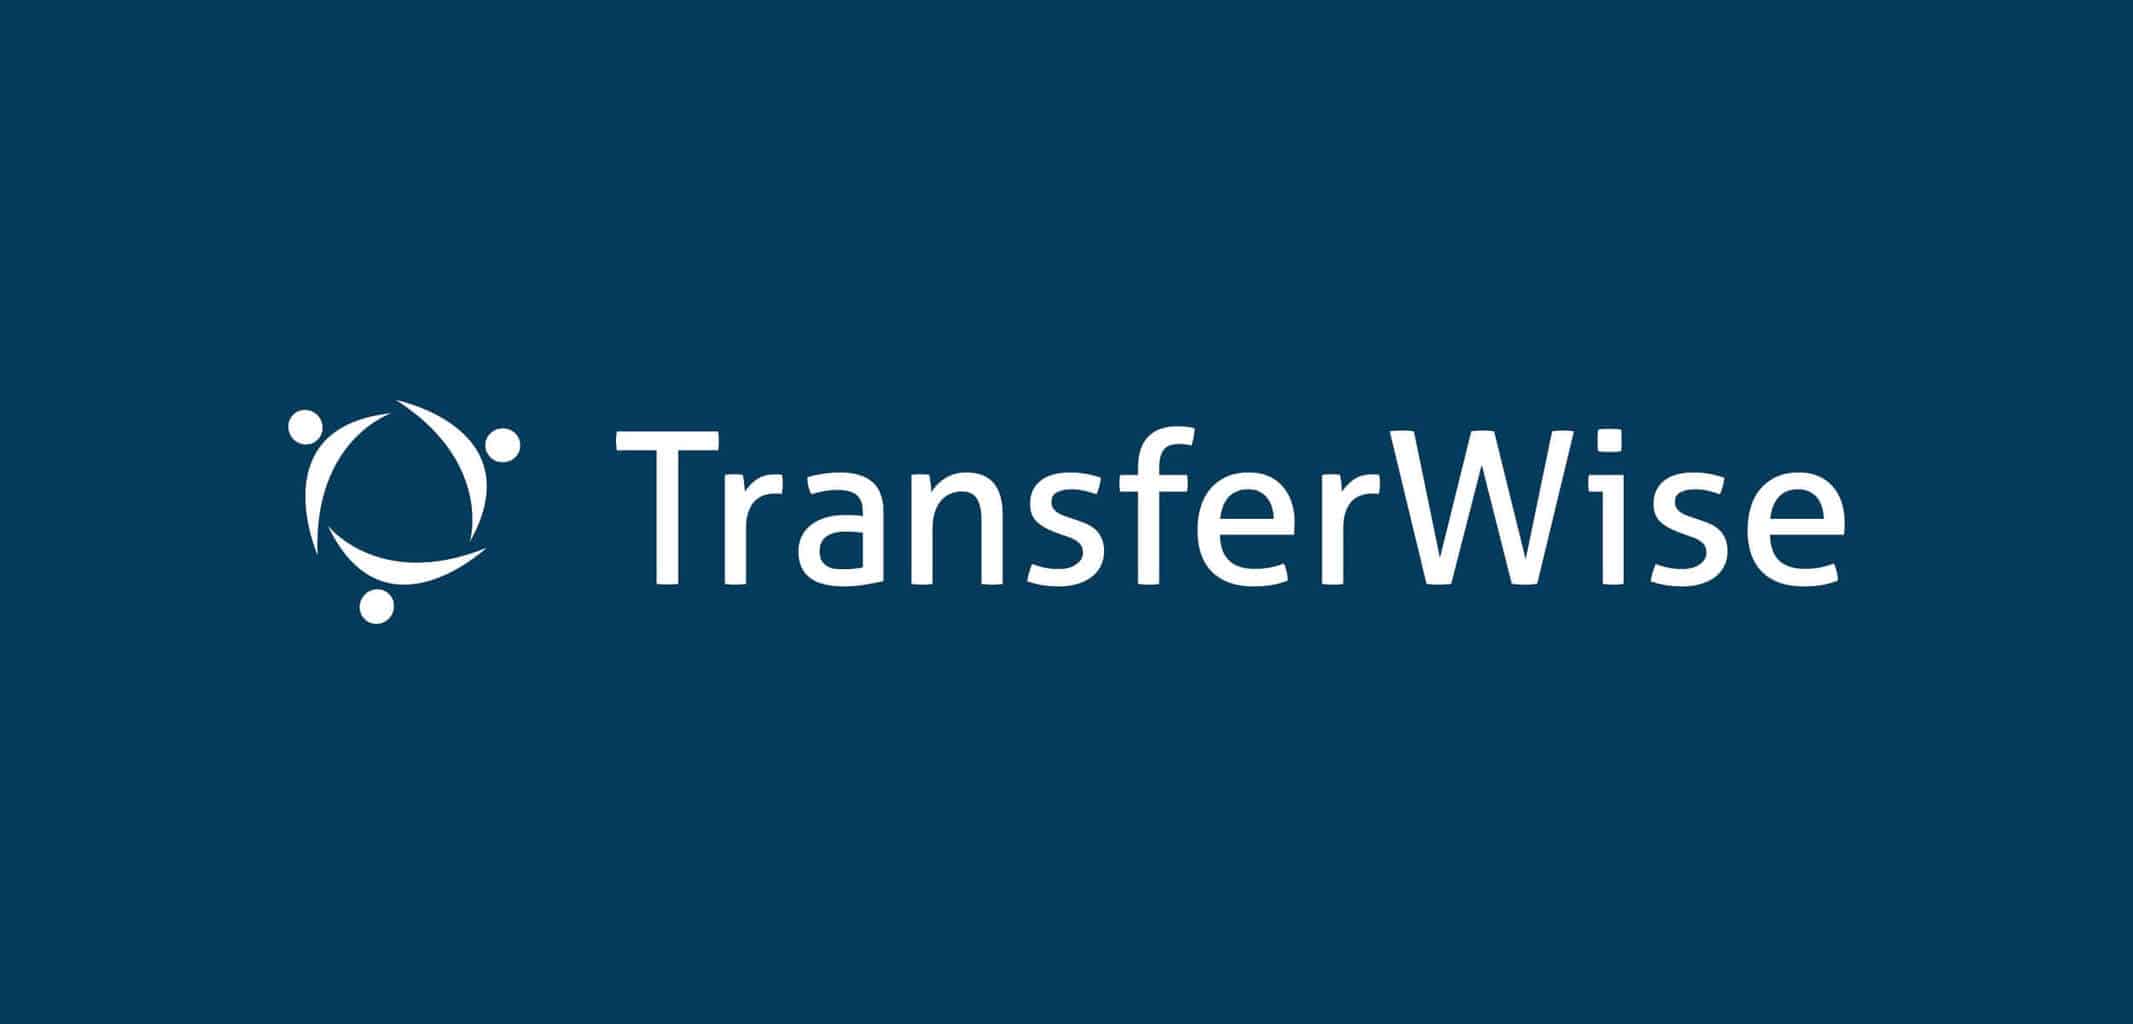 TransferWise Finishes a $292 Million Secondary Round, Now Valued At $3.5 Billion